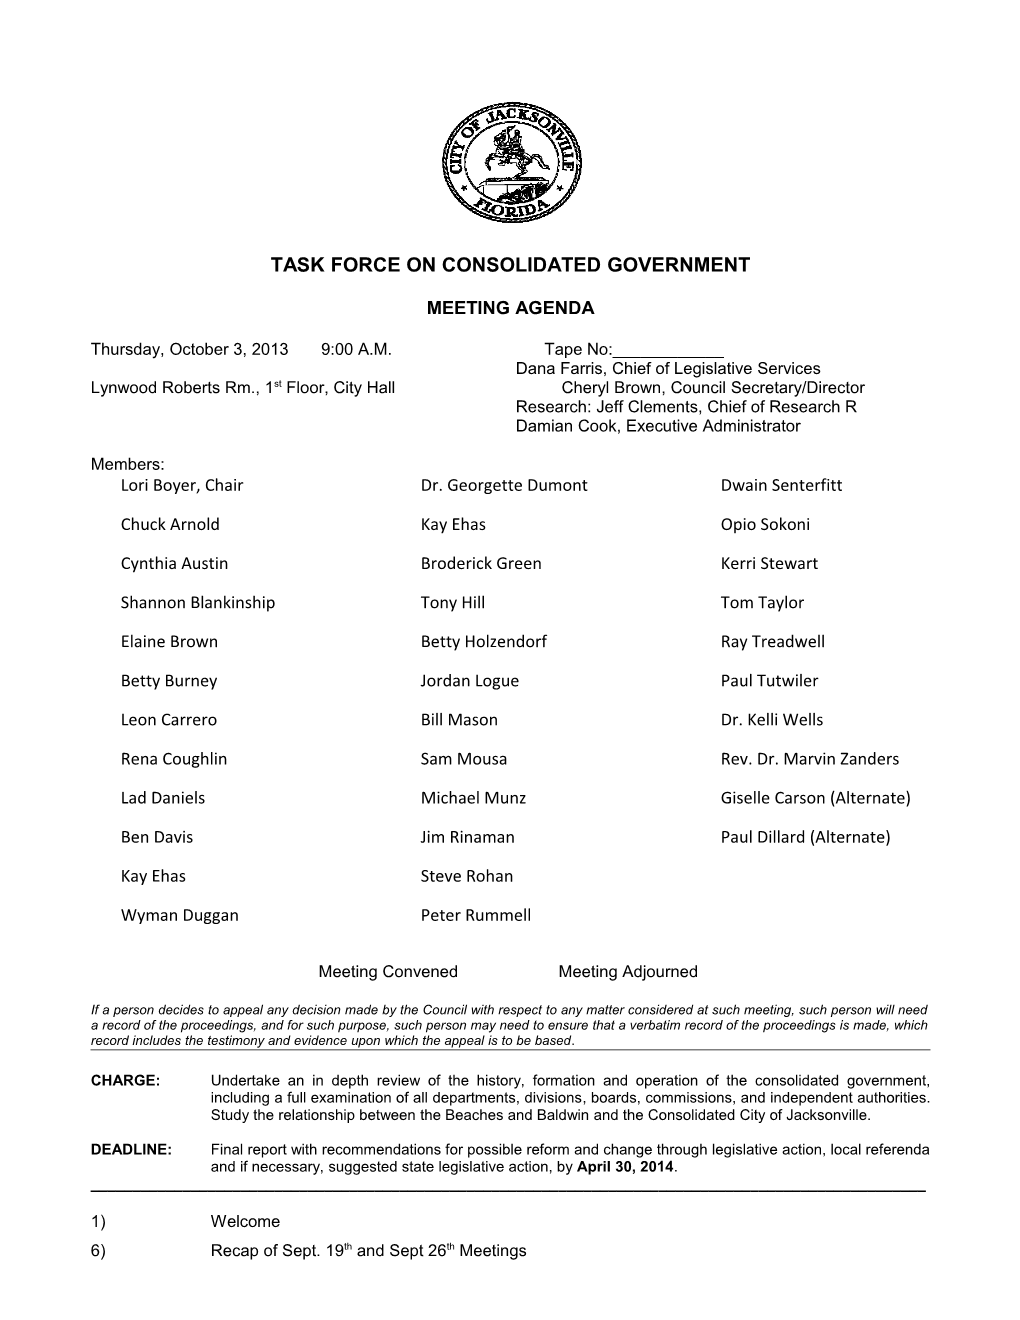 Task Force on Consolidated Government